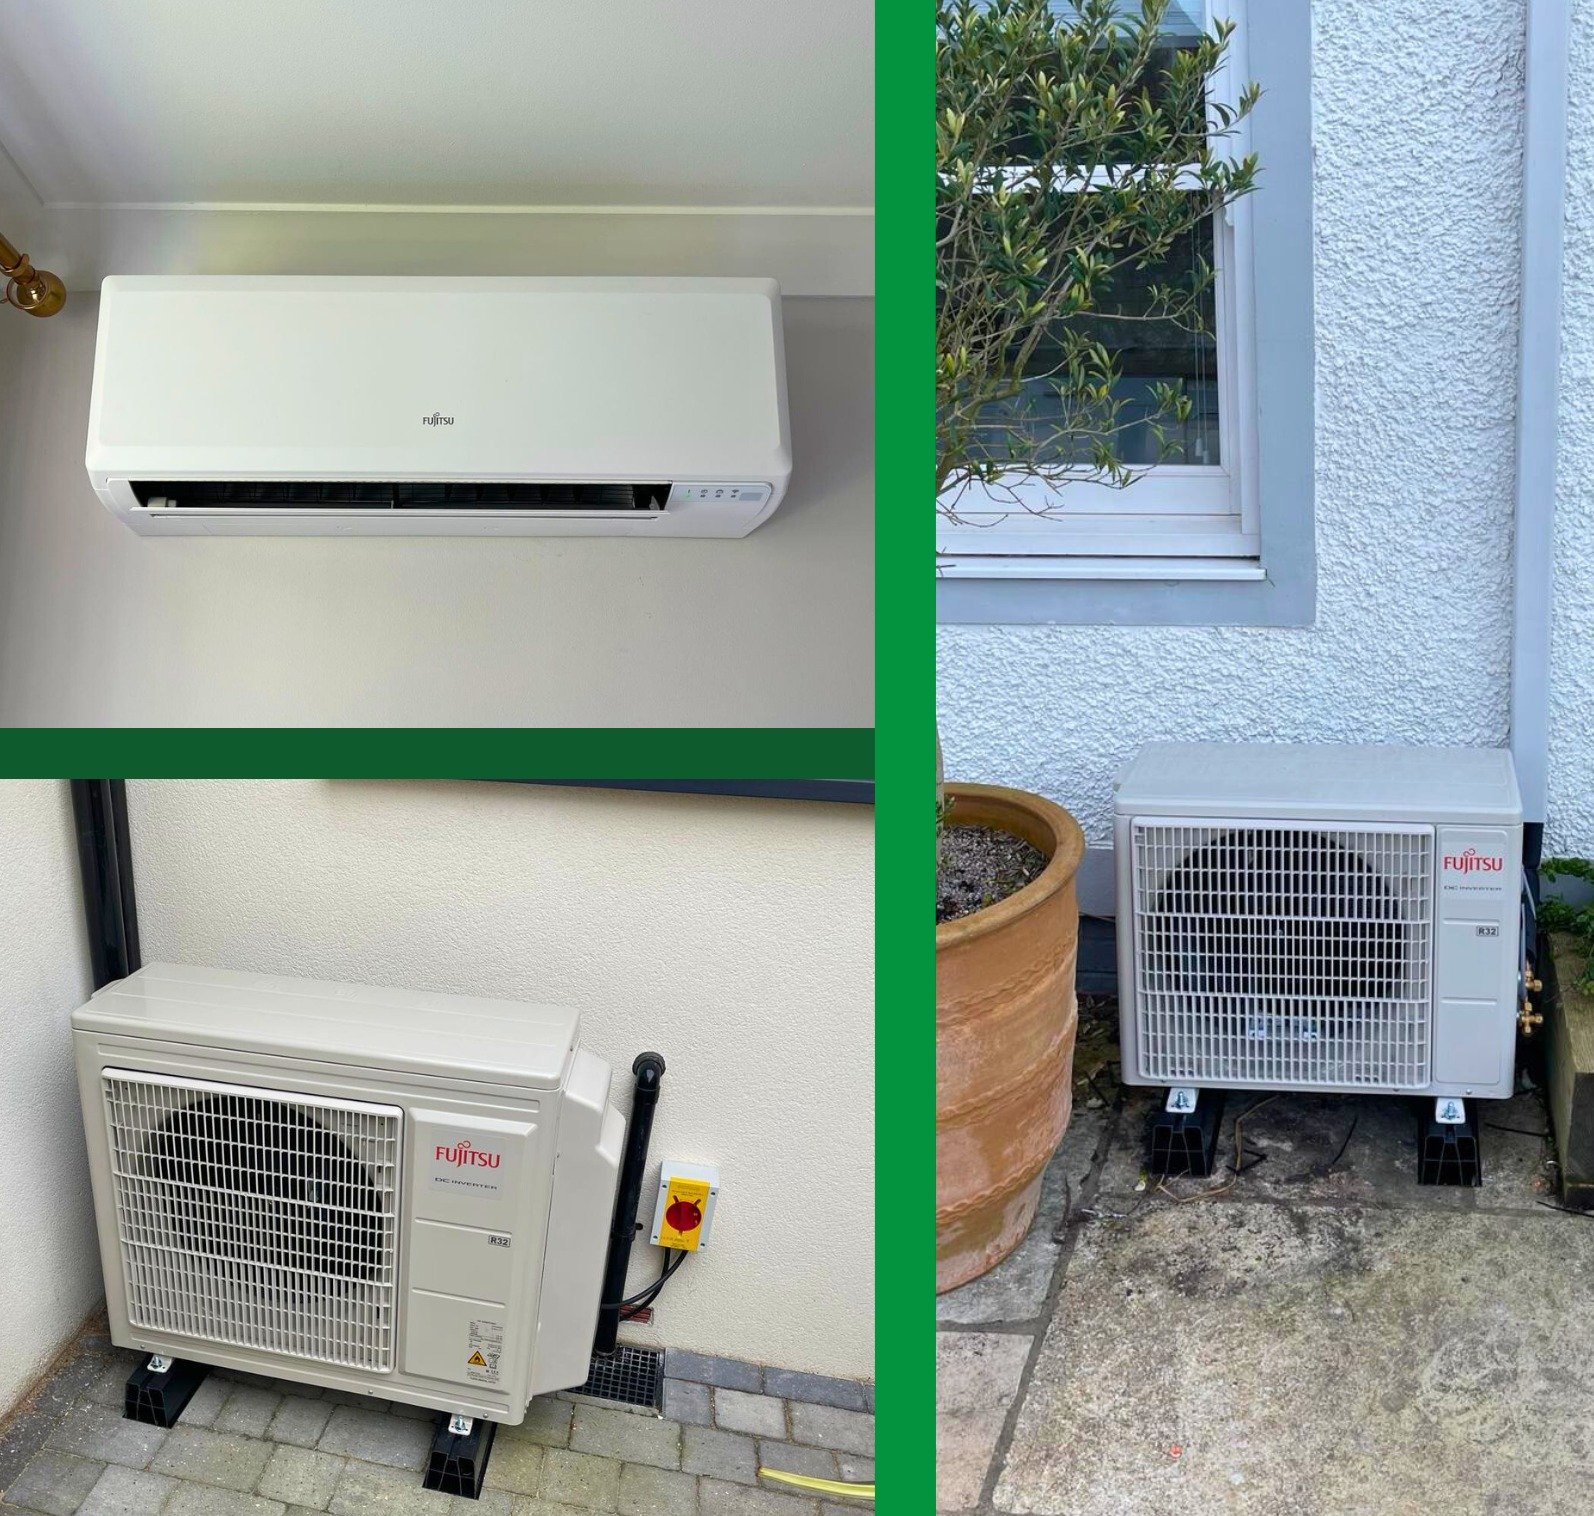 Did you know CRG also supply and fit AC systems?

Heat and cool at the touch of a button with Fujitsu AC.

Your perfect temperature, every time.

#acinstallations #CRGDirect #acunit